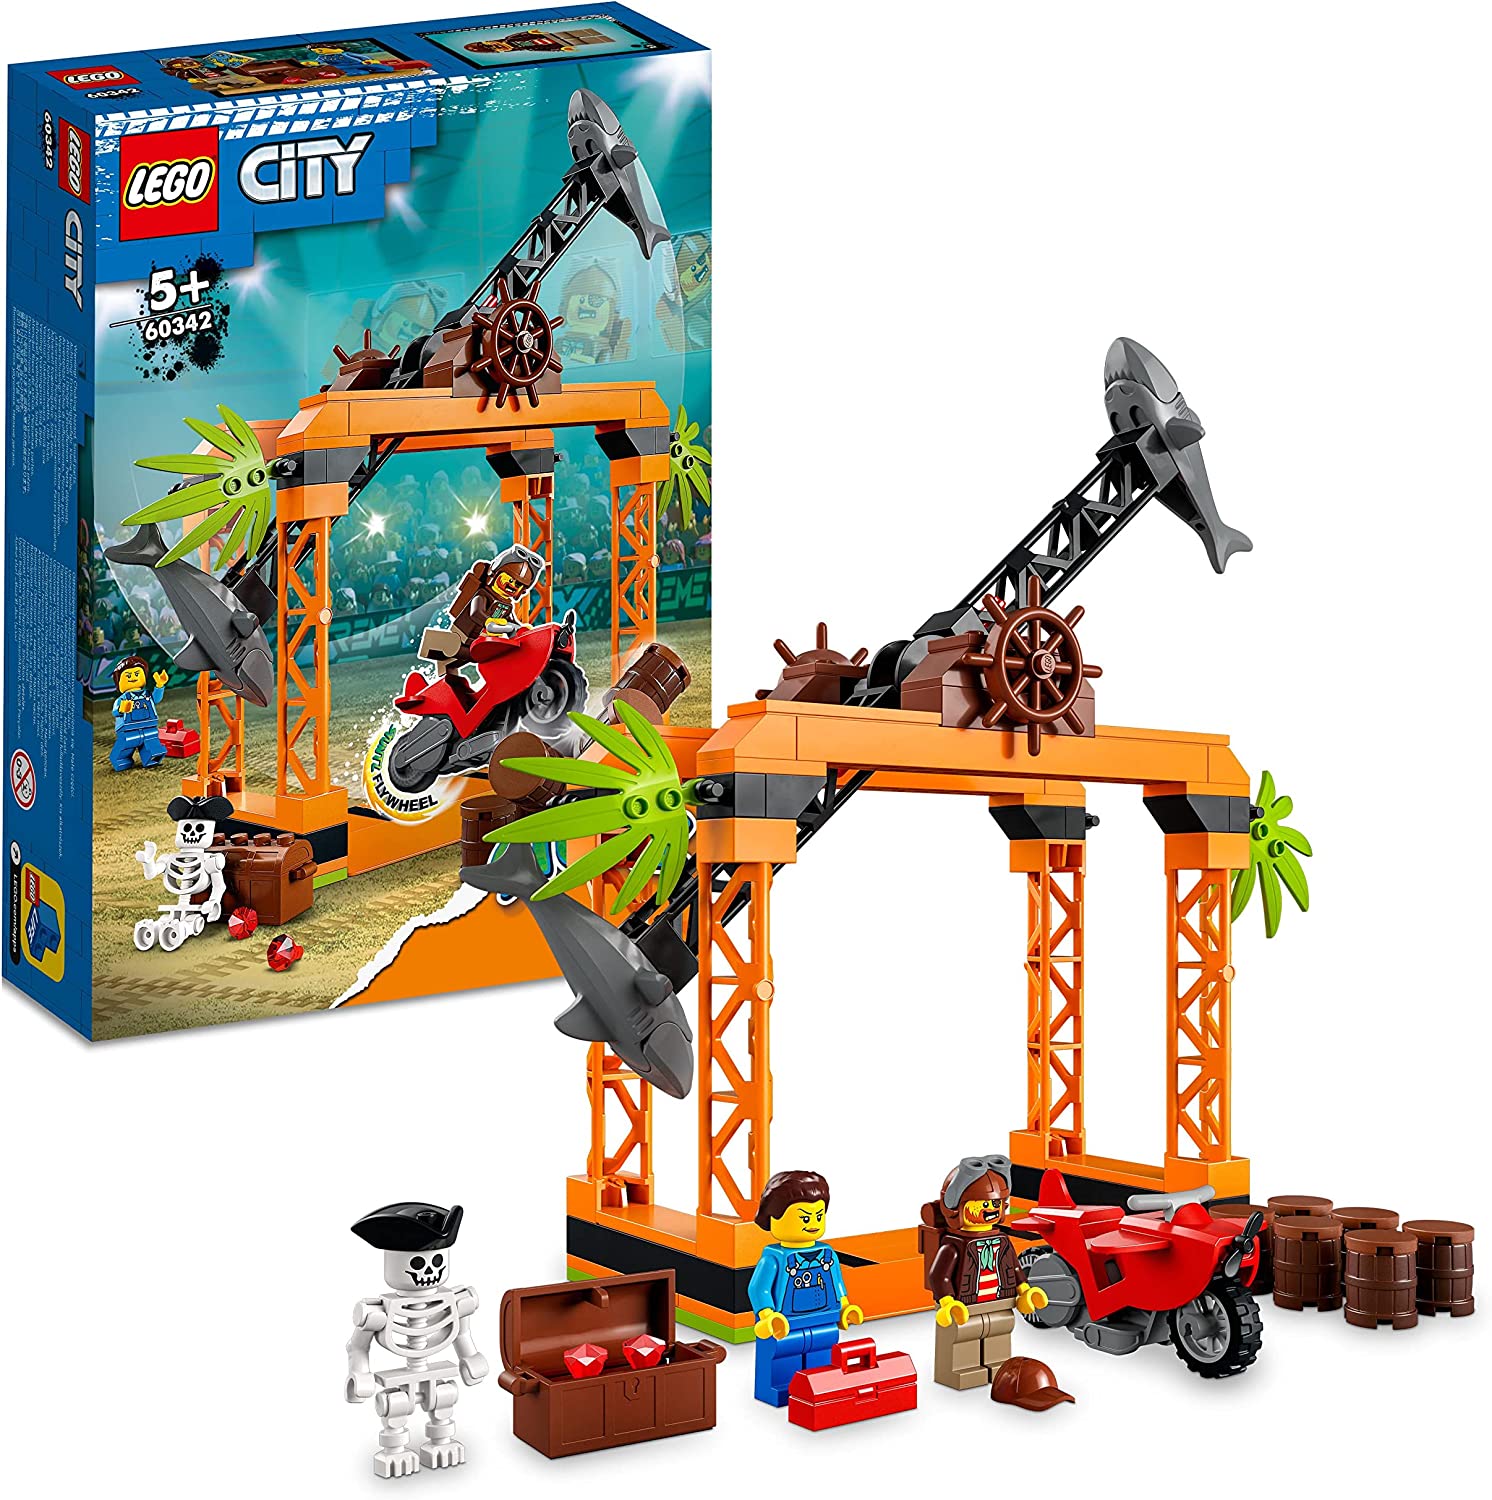 LEGO 60342 City Stuntz Shark Attack Challenge Set Including Motorcycle and Stunt Racer Mini Figure Action Toy for Children Aged 5 Years and Above